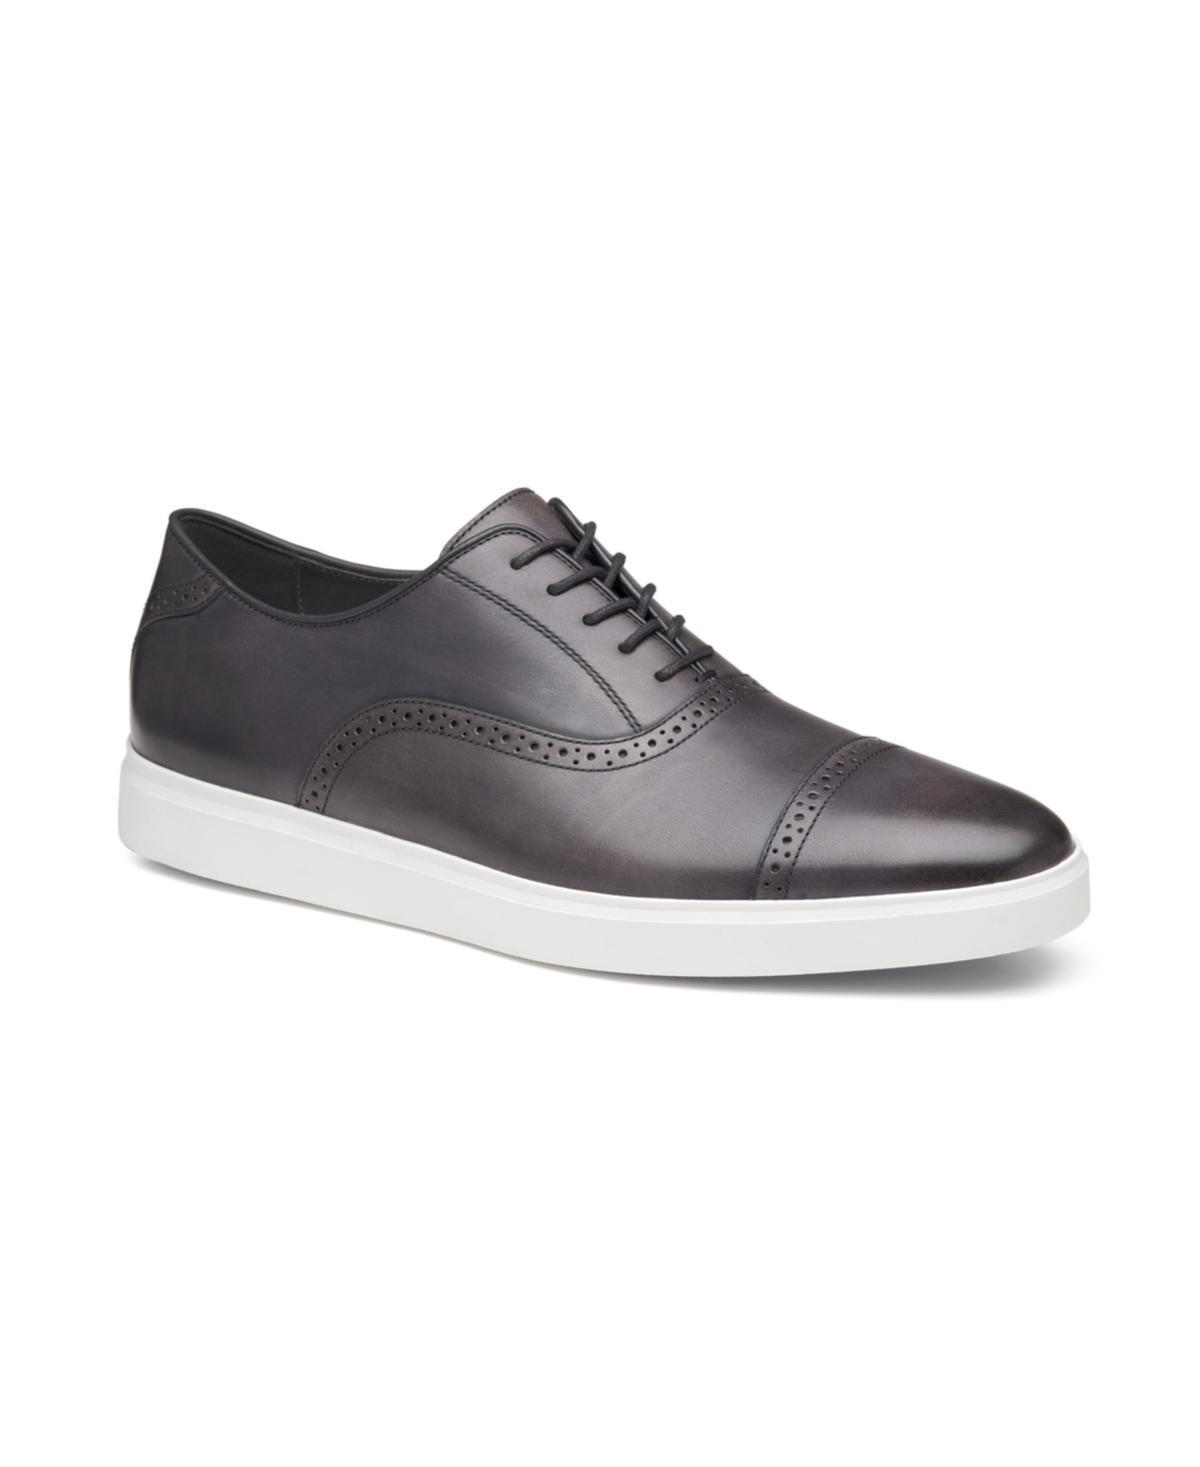 Johnston  Murphy Mens Brody Leather Cap Toe Oxfords Product Image